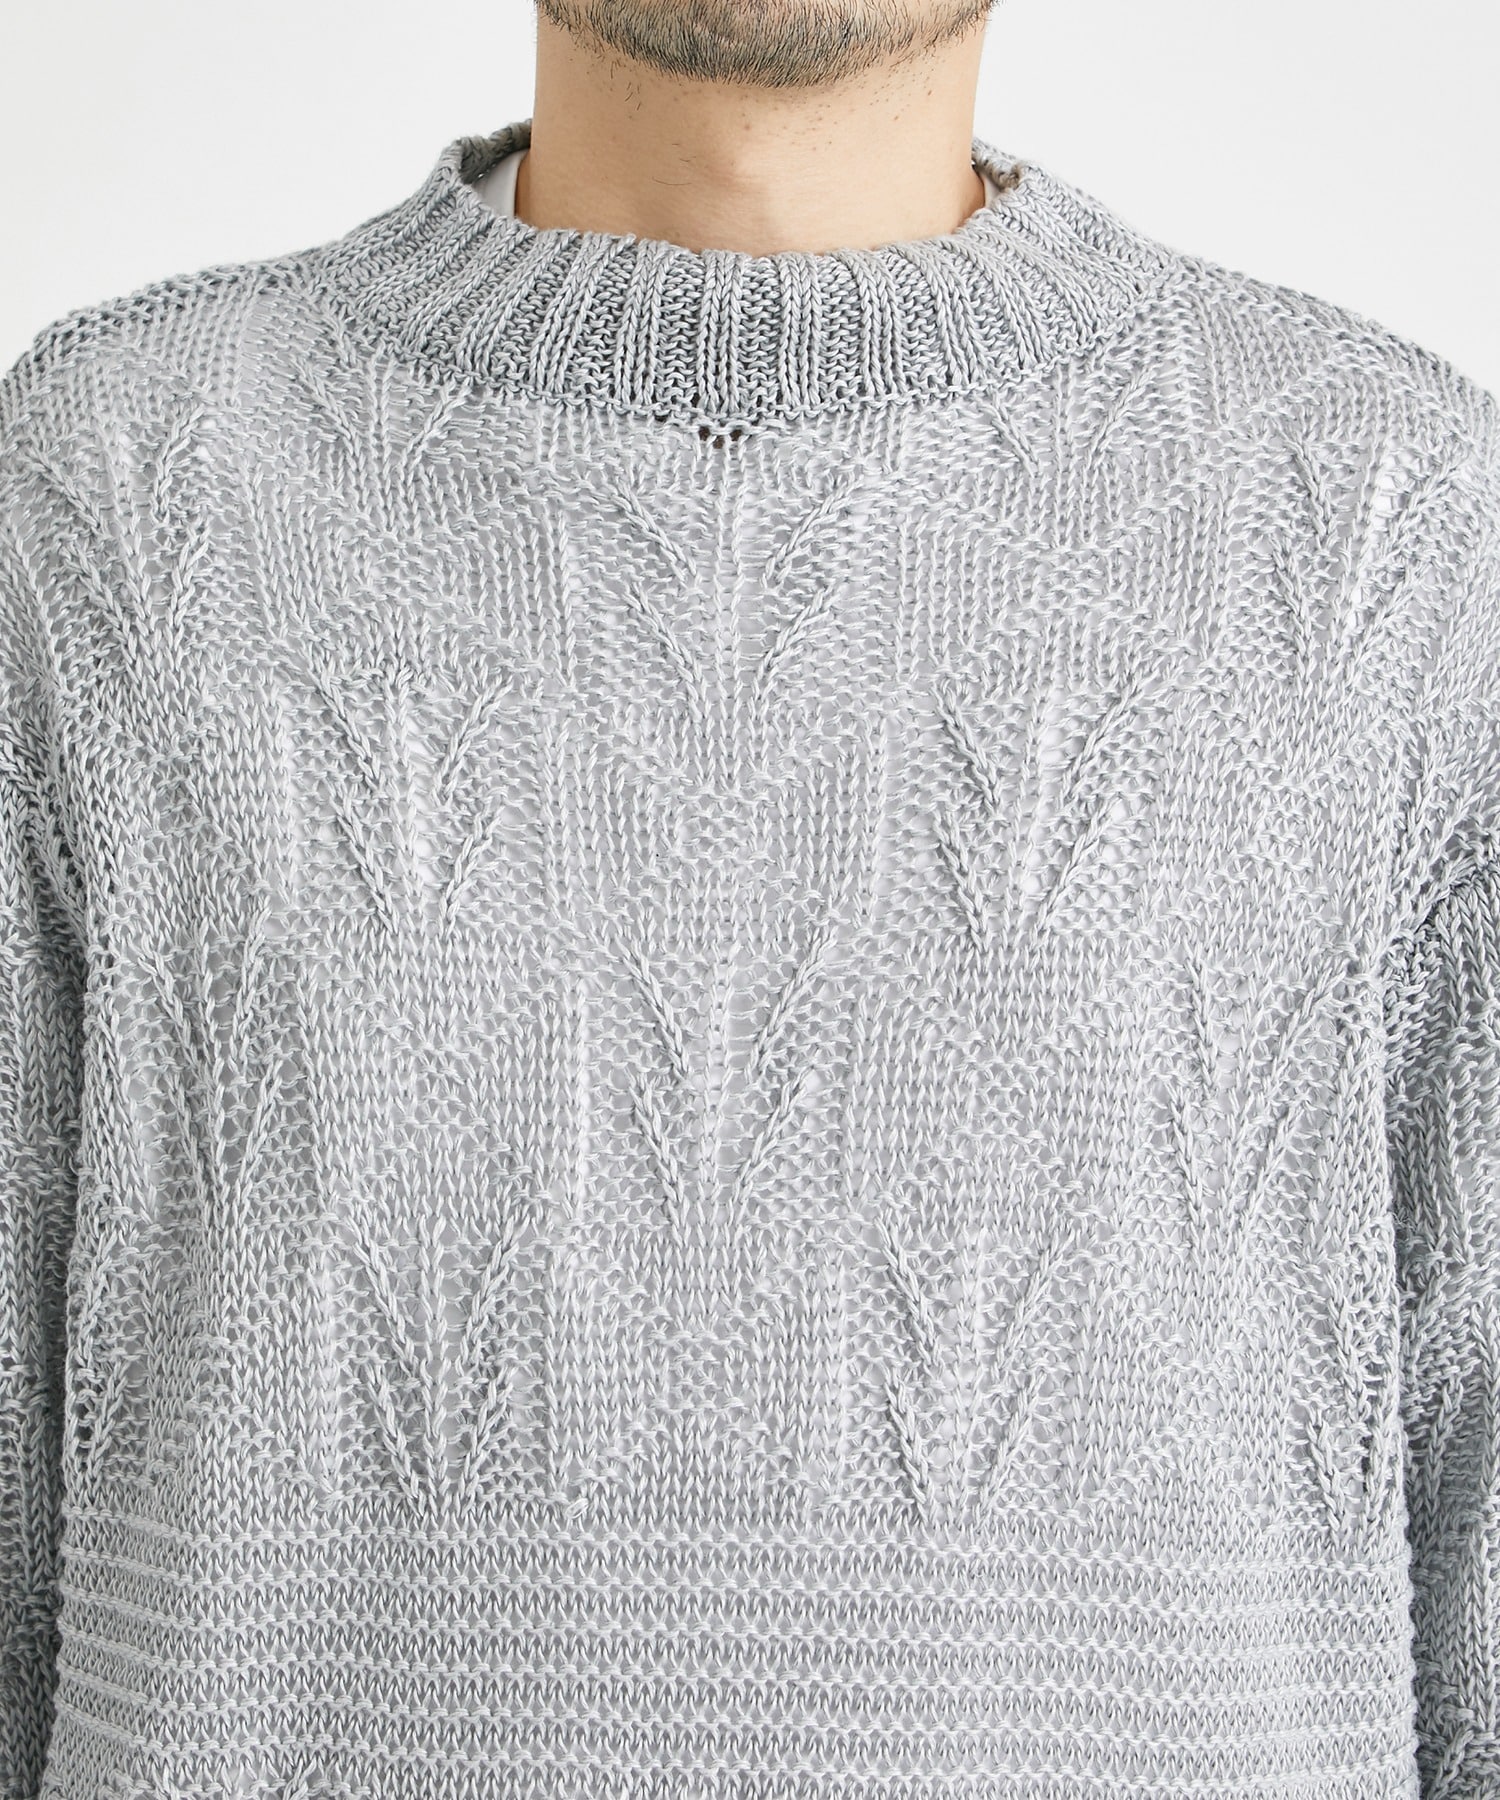 Linen fisherman Knit(1 GREY): th products: MEN｜THE TOKYO ONLINE STORE